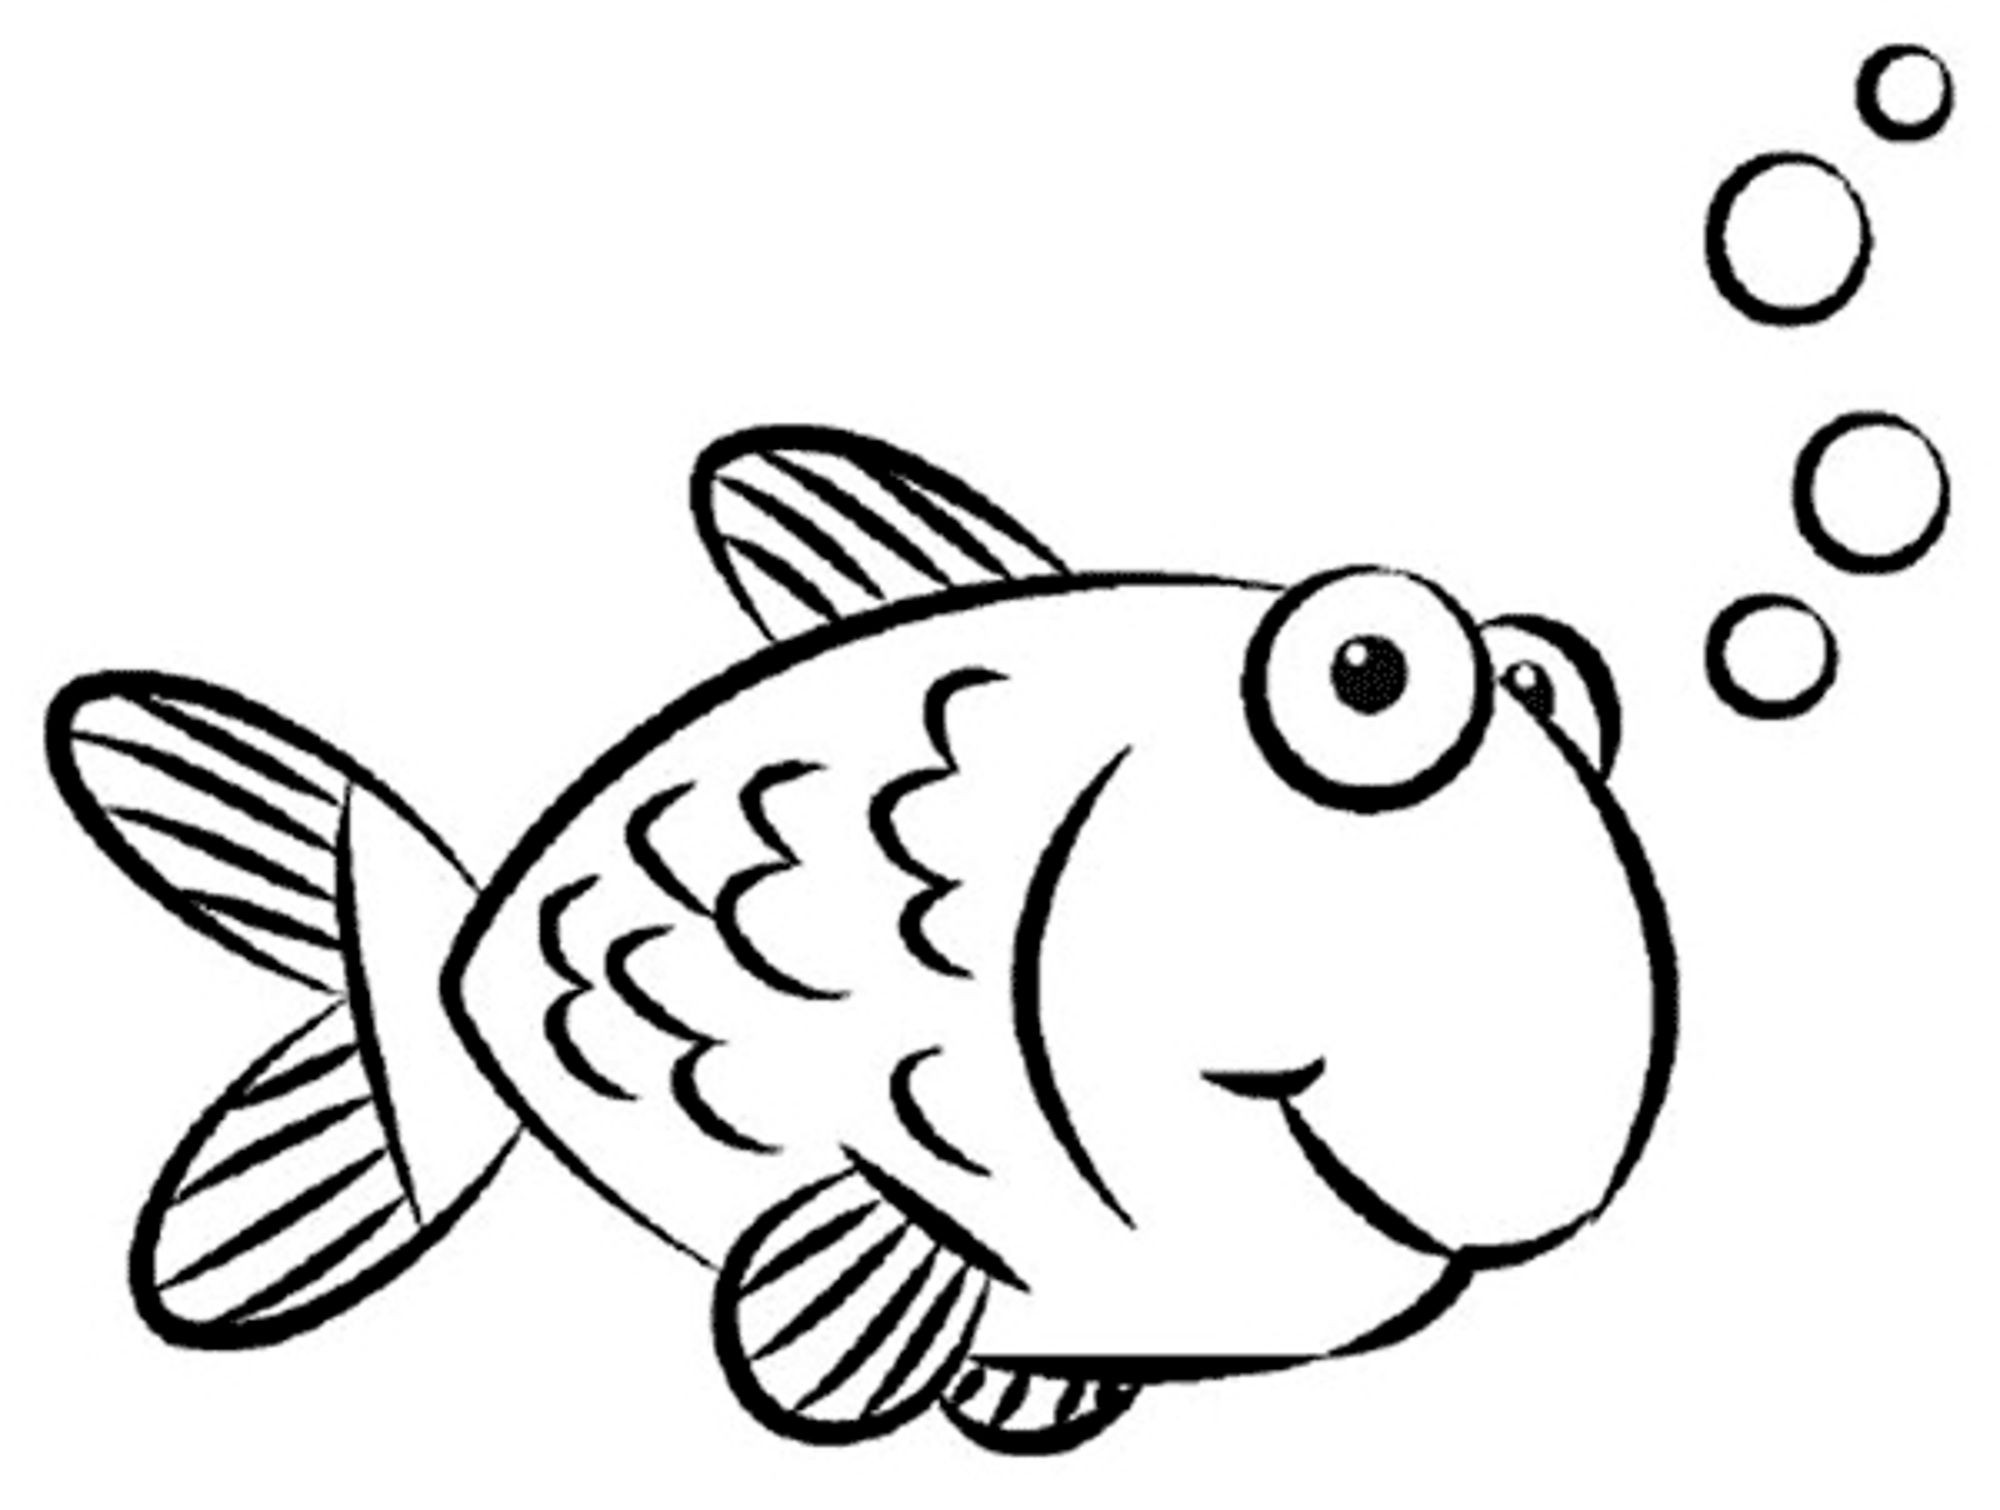 Coloring Pages For Kids Fish
 Print & Download Cute and Educative Fish Coloring Pages